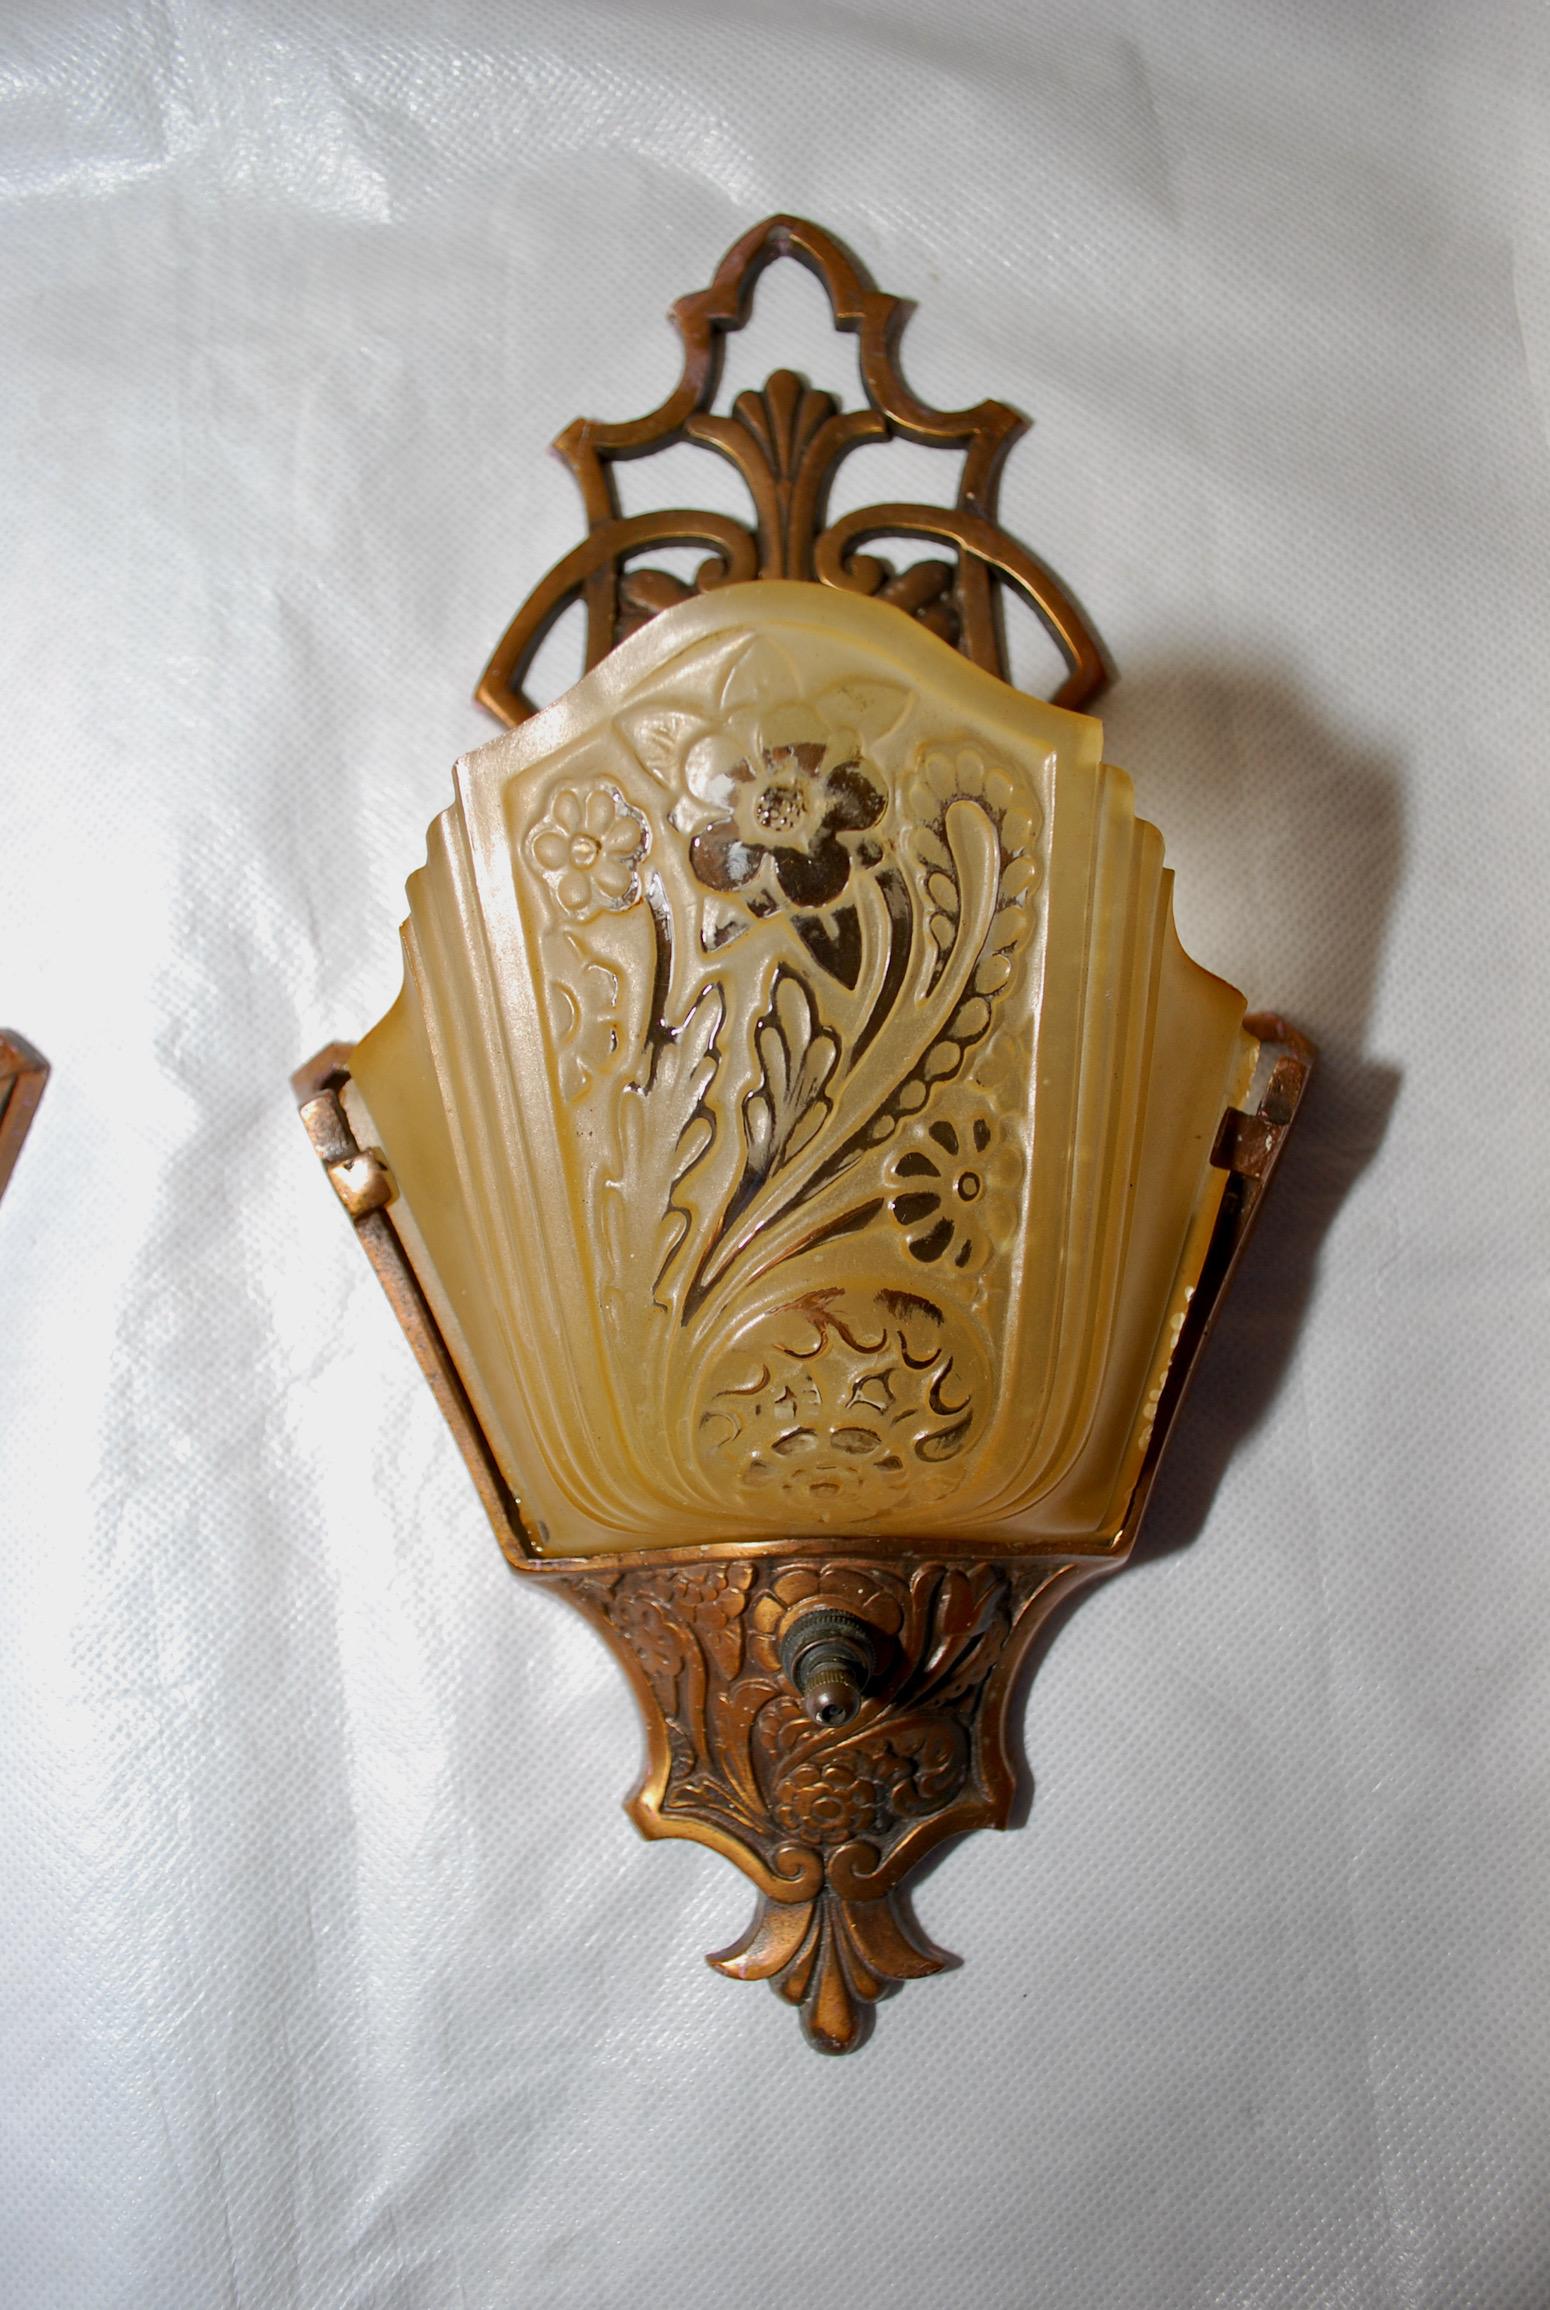 A beautiful pair of 1920's sconces, the frame is made of aluminum, with a broze color.